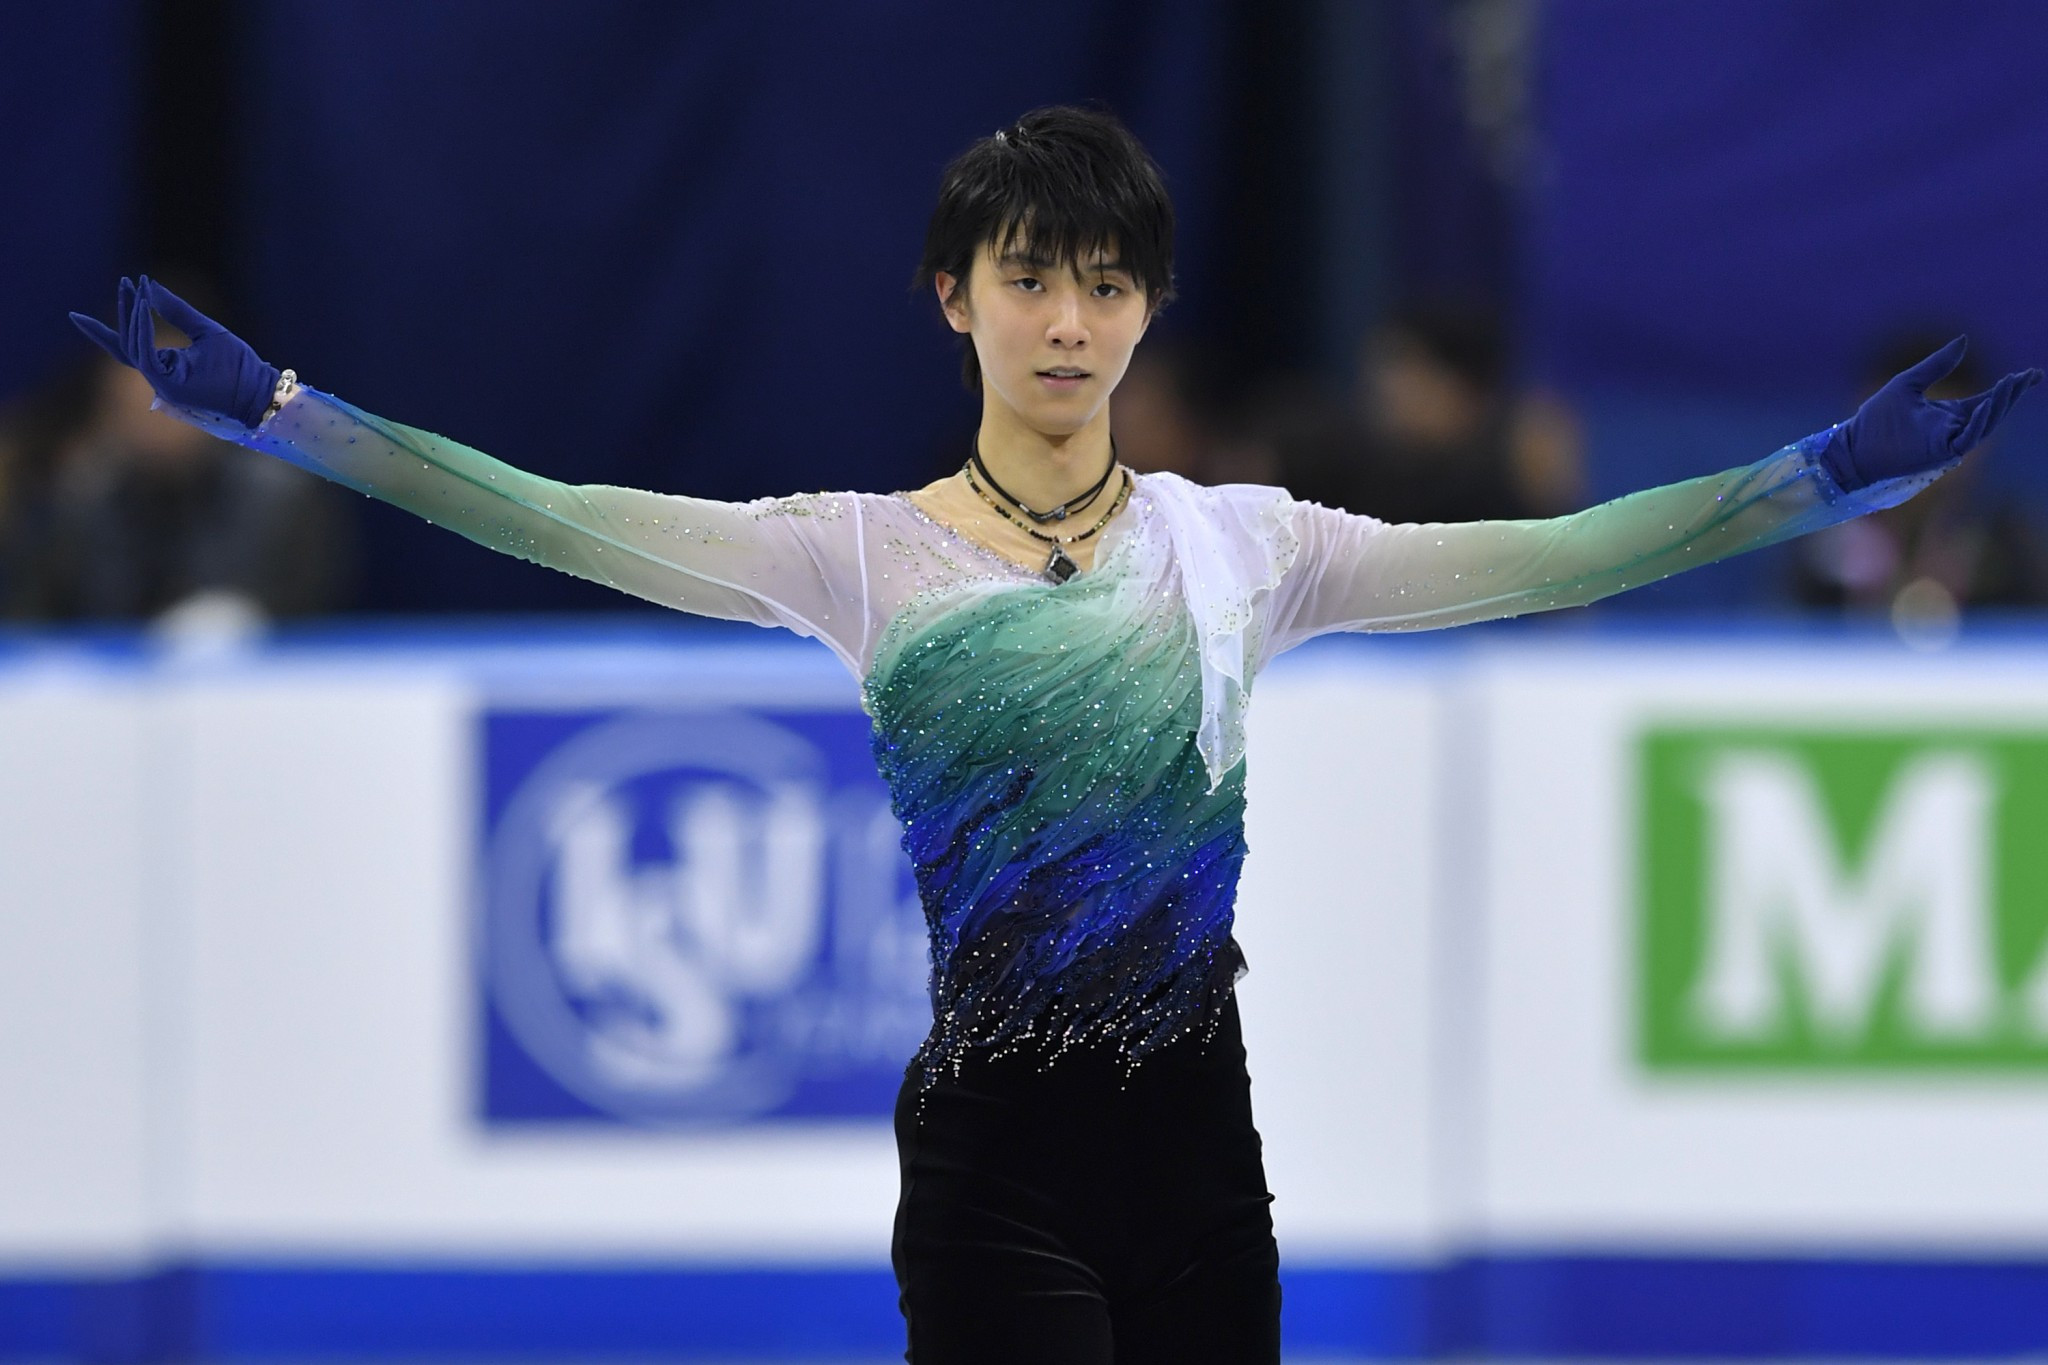 Yuzuru Hanyu has announced the piece of music he will be skating to during the free programme at Pyeongchang 2018 ©Getty Images